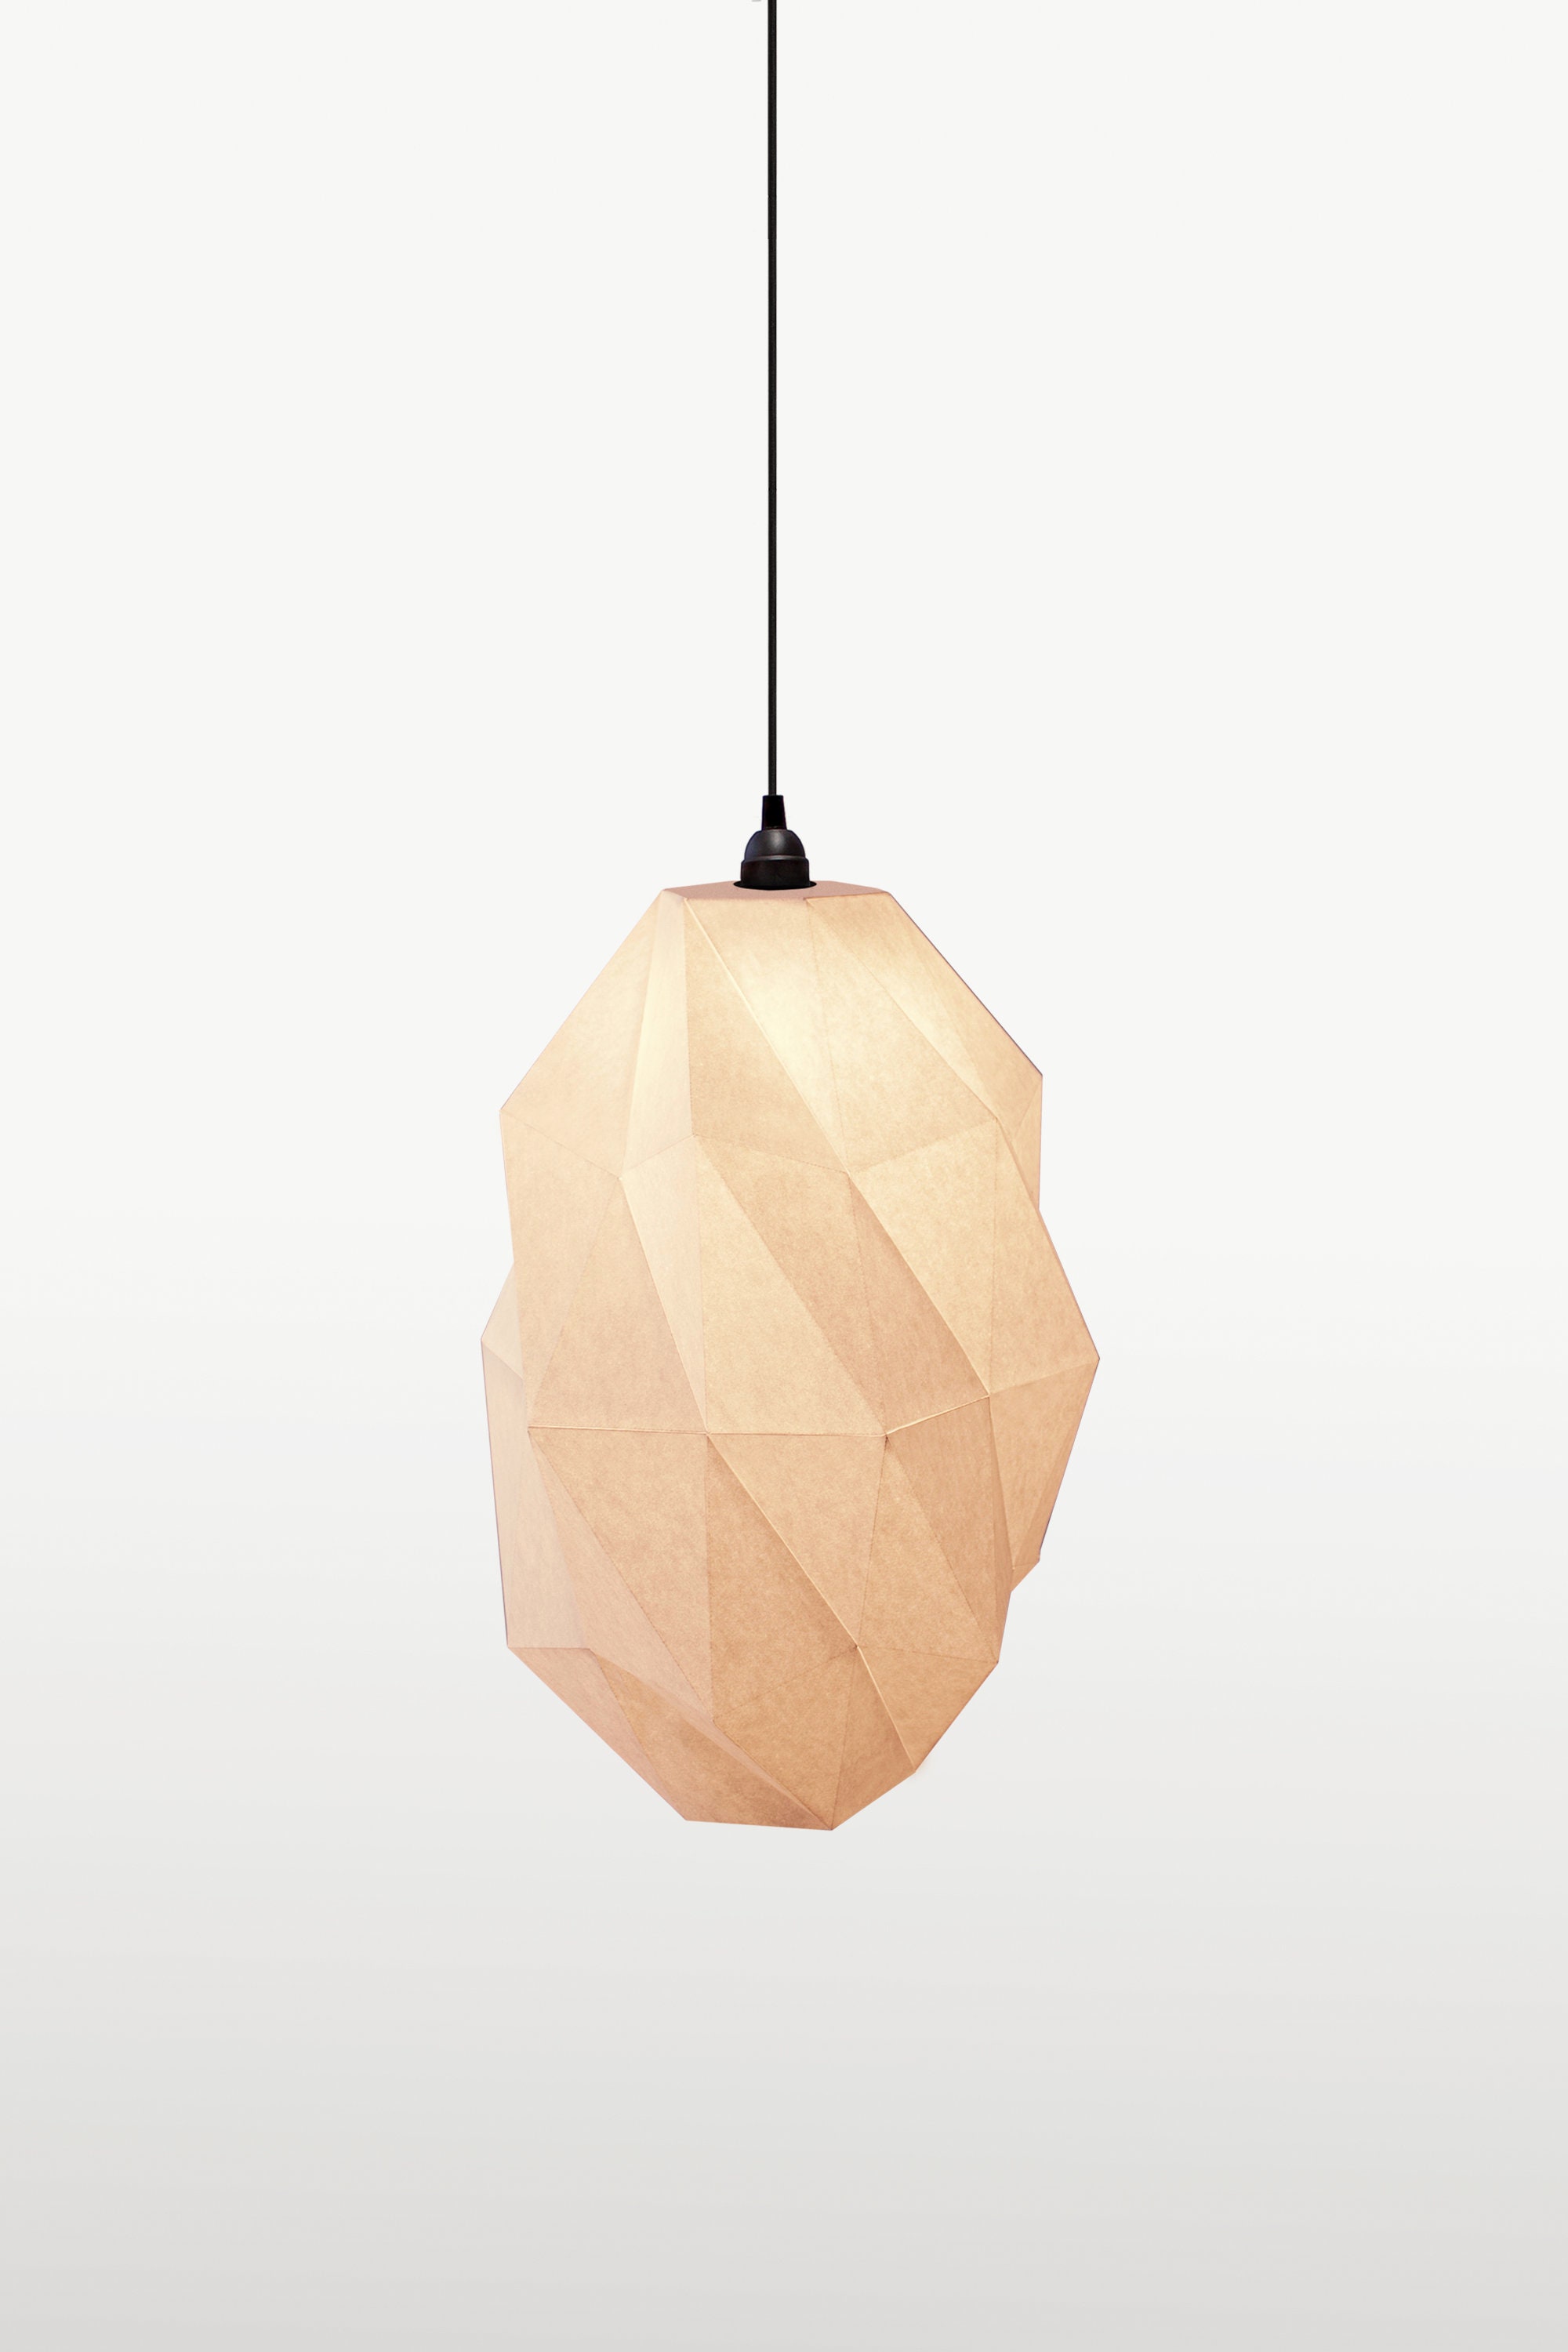 Cocoon Large - DIY Paper Lampshade | Instant PDF Download